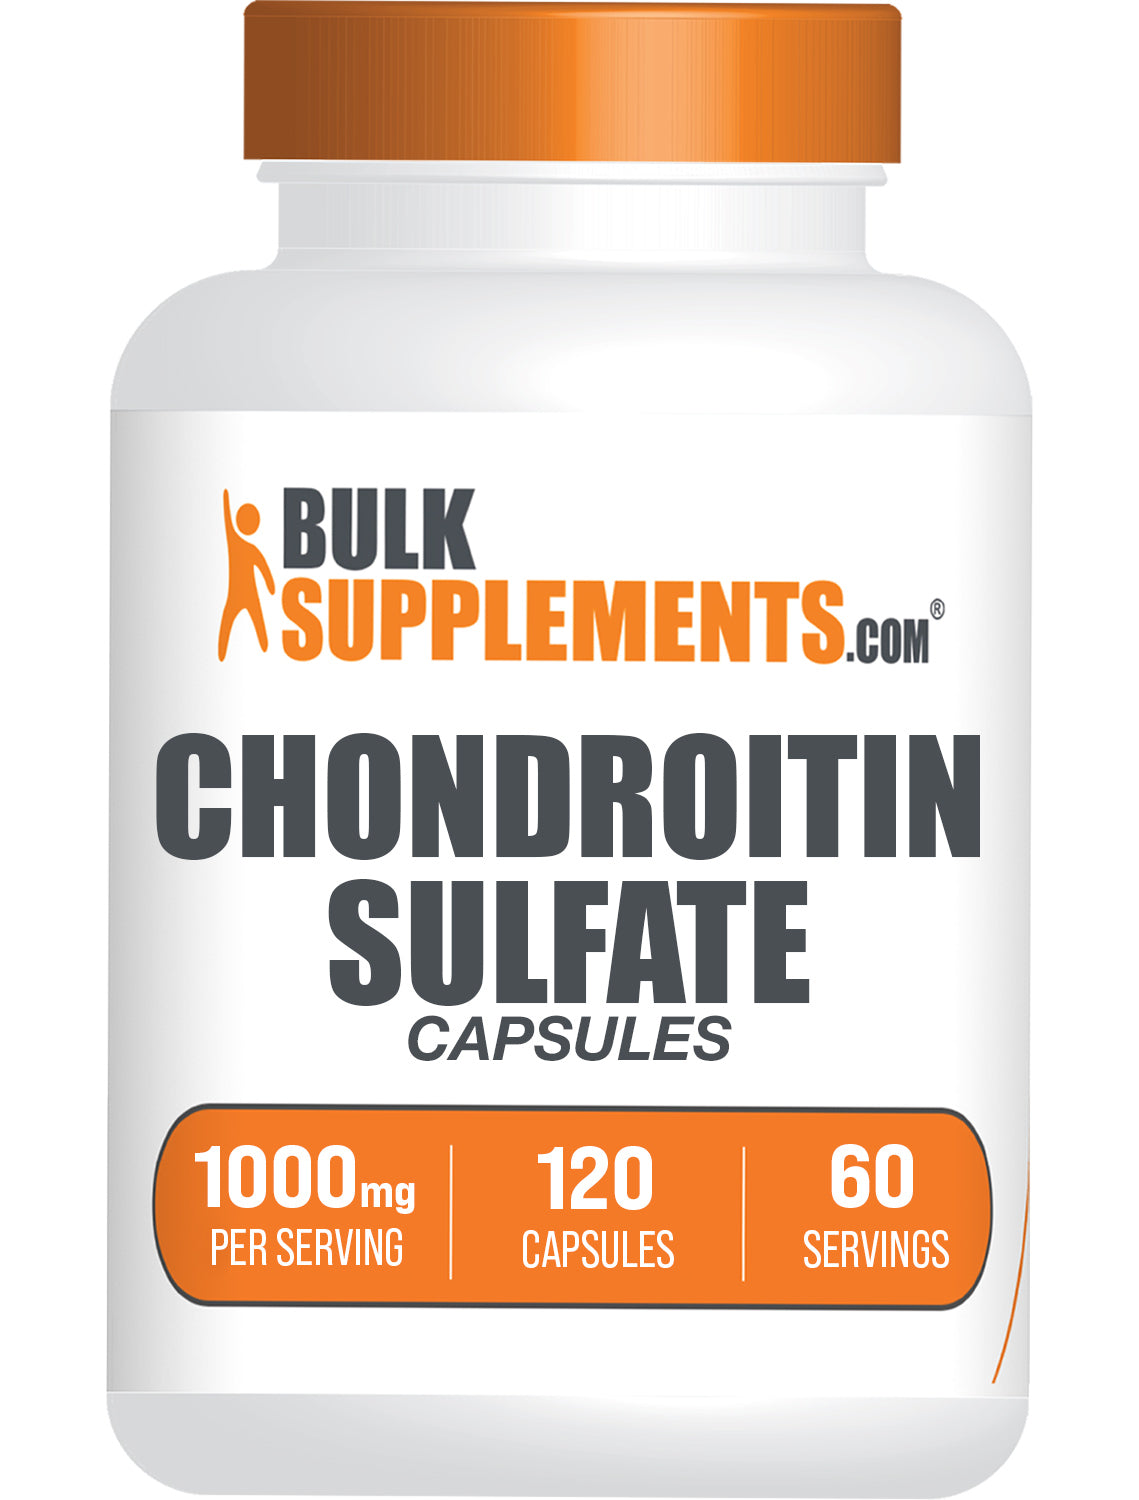 BulkSupplements Chondroitin Sulfate Capsules.com 1000mg 120 Capsules Bottle